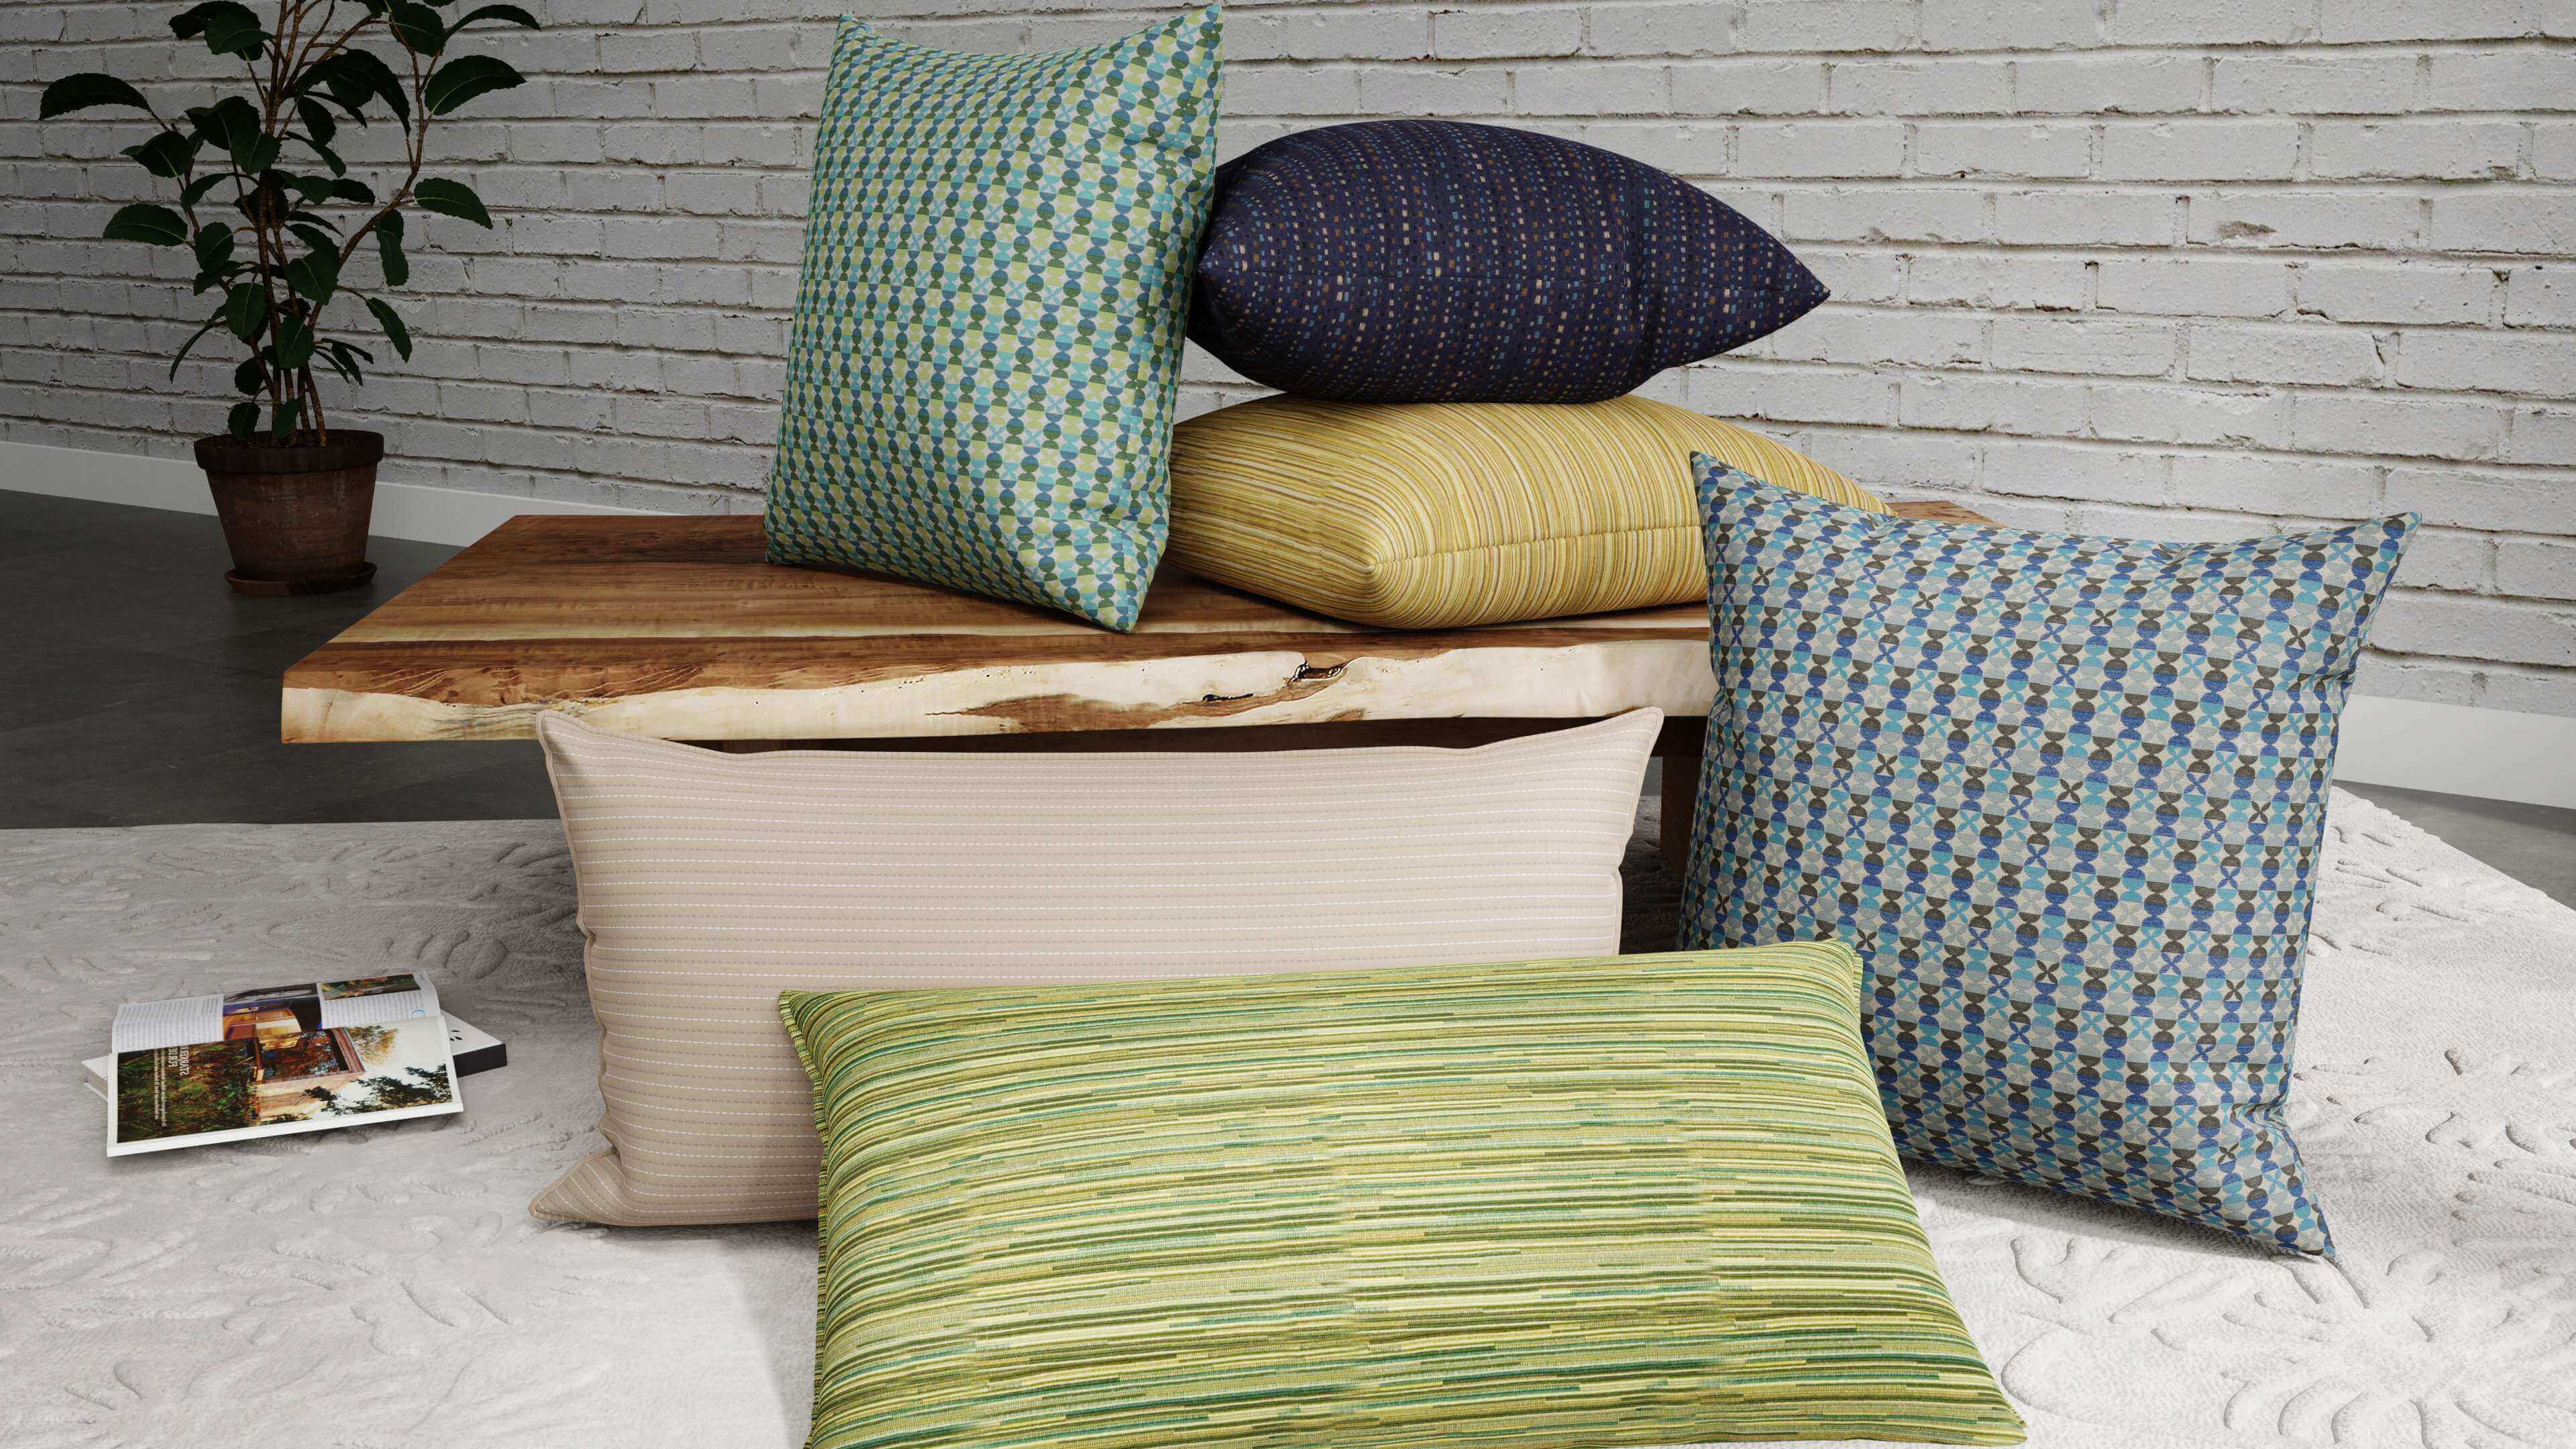 3D cushions in a variety of patterns by Innovasion made created in imagine.io lifestyle template